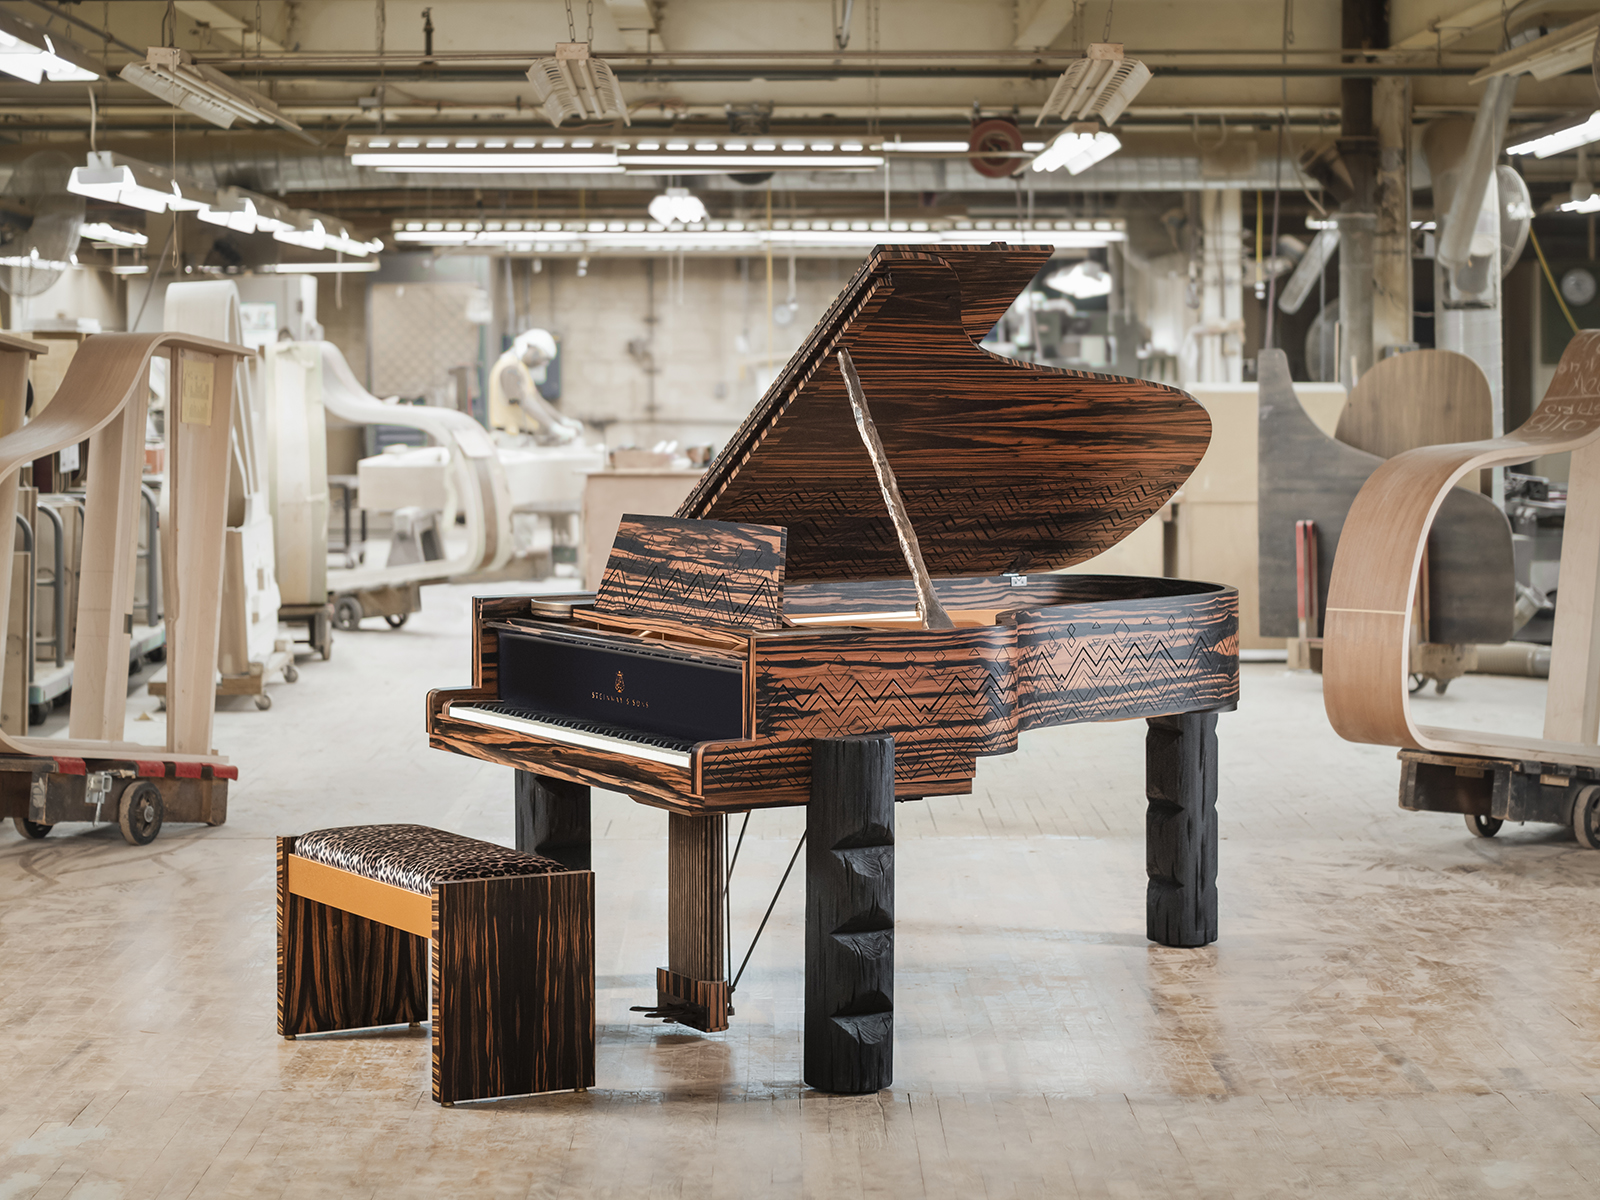 This specially commissioned grand piano was built in collaboration with Steinway and rock star Lenny Kravitz.